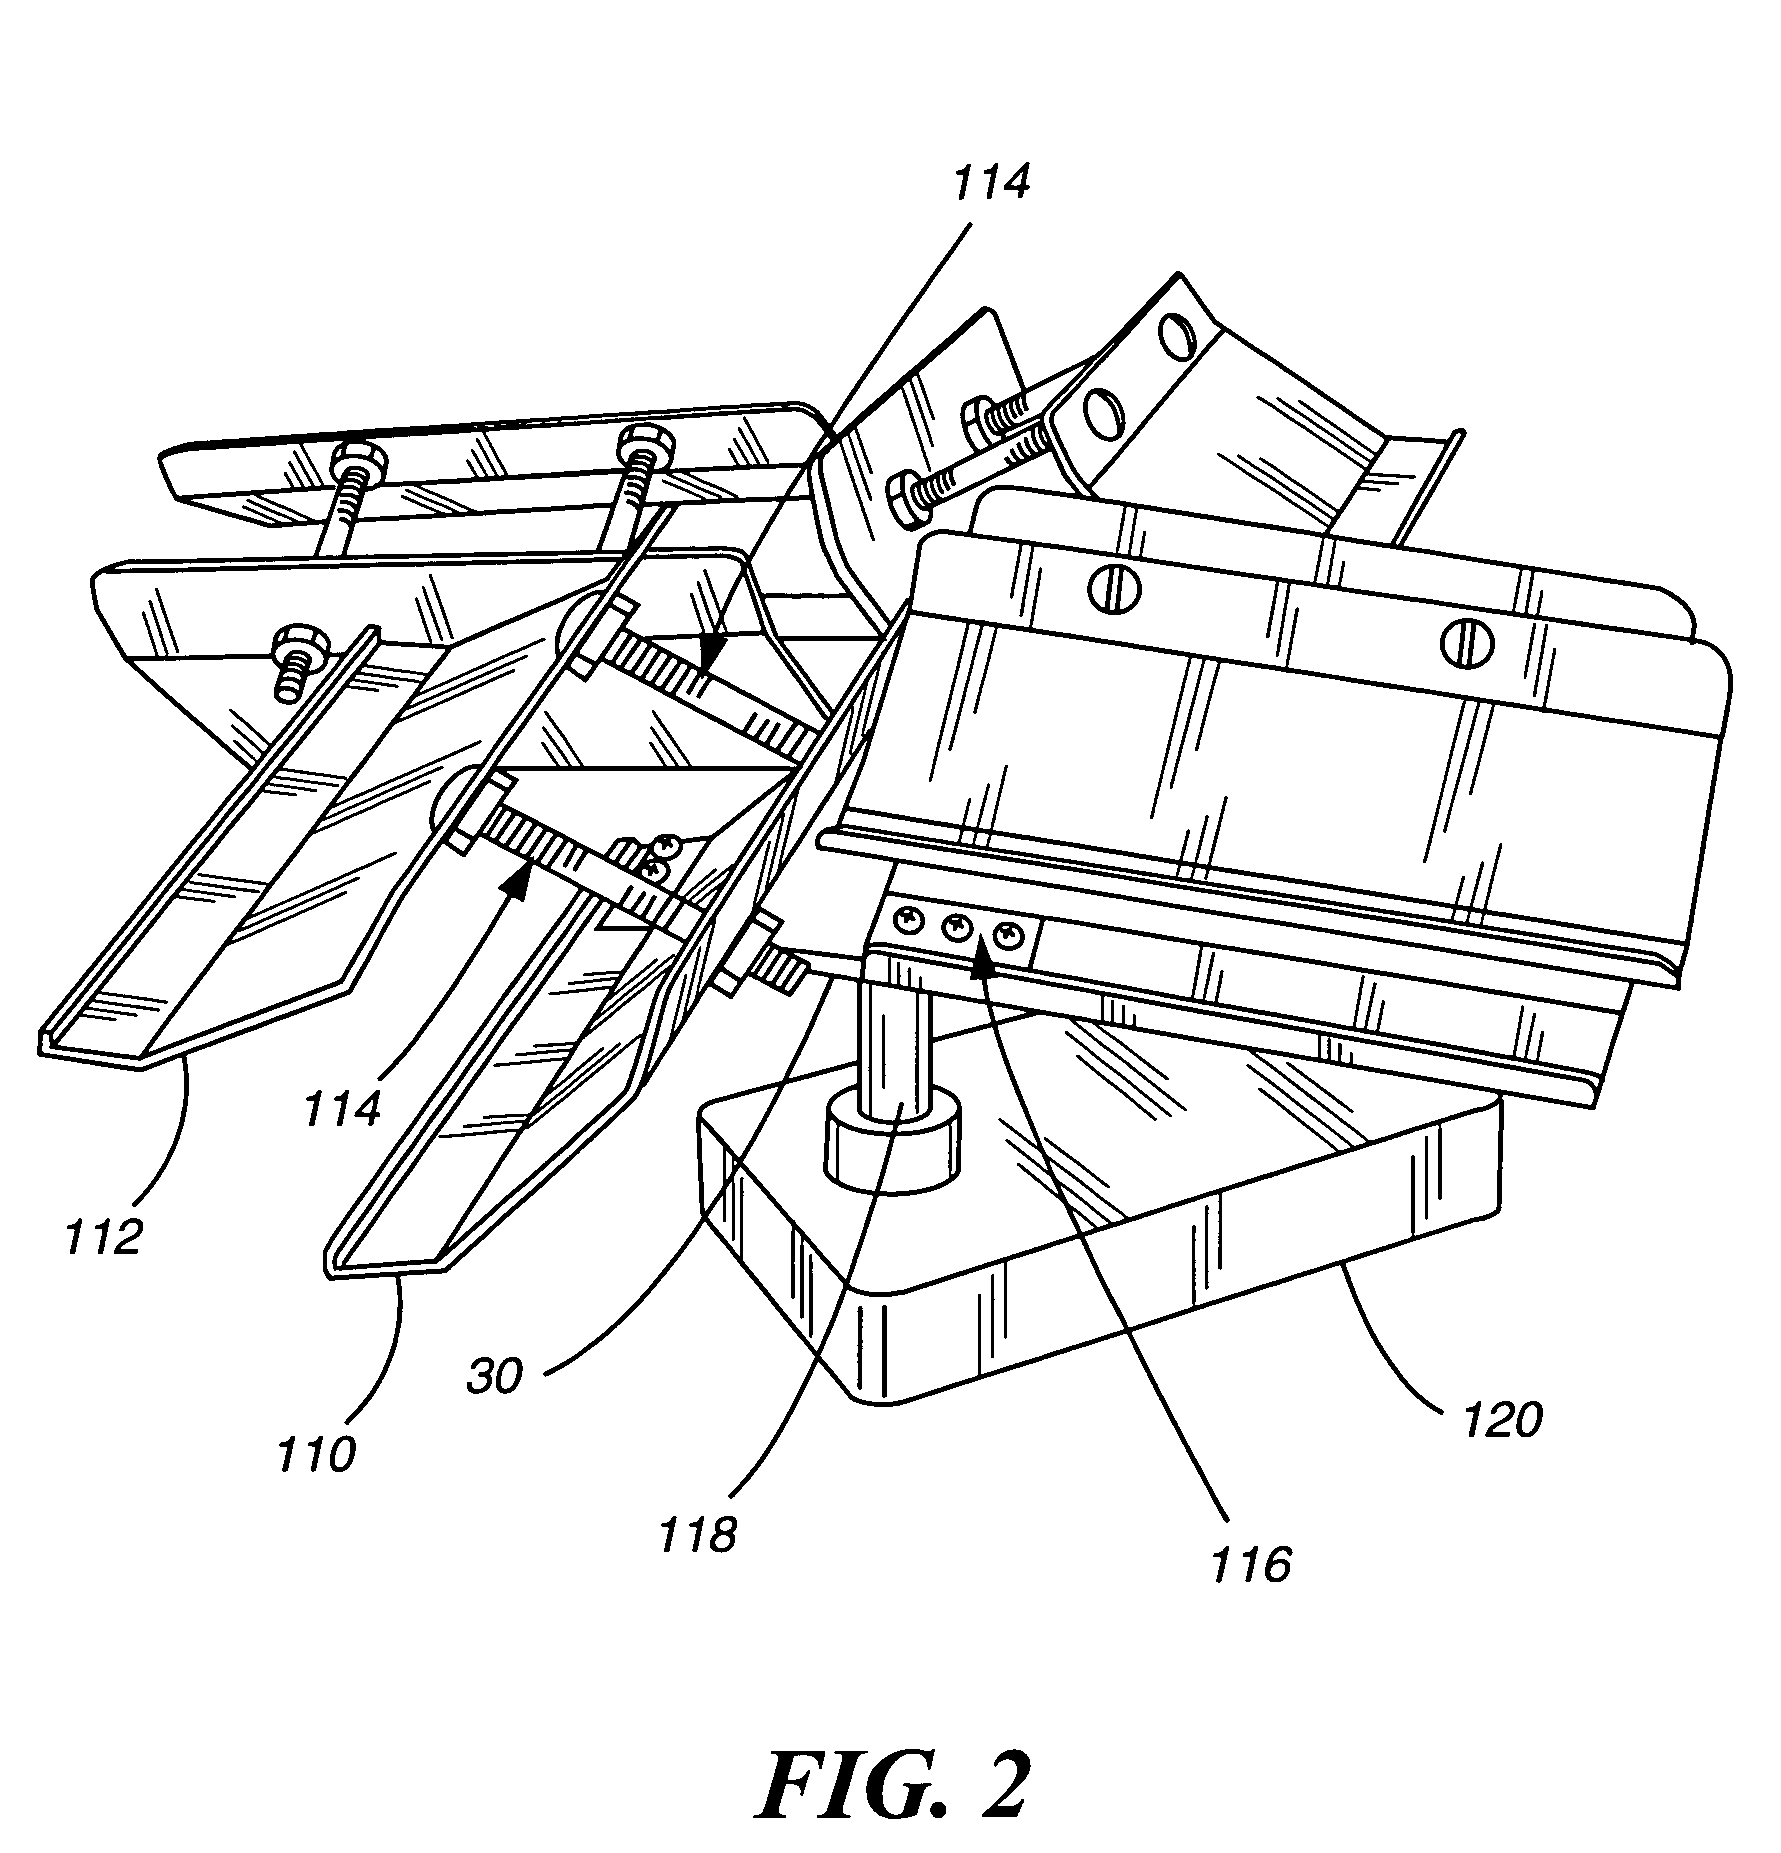 Windmill apparatuses and methods of mounting blades to enhance their performance